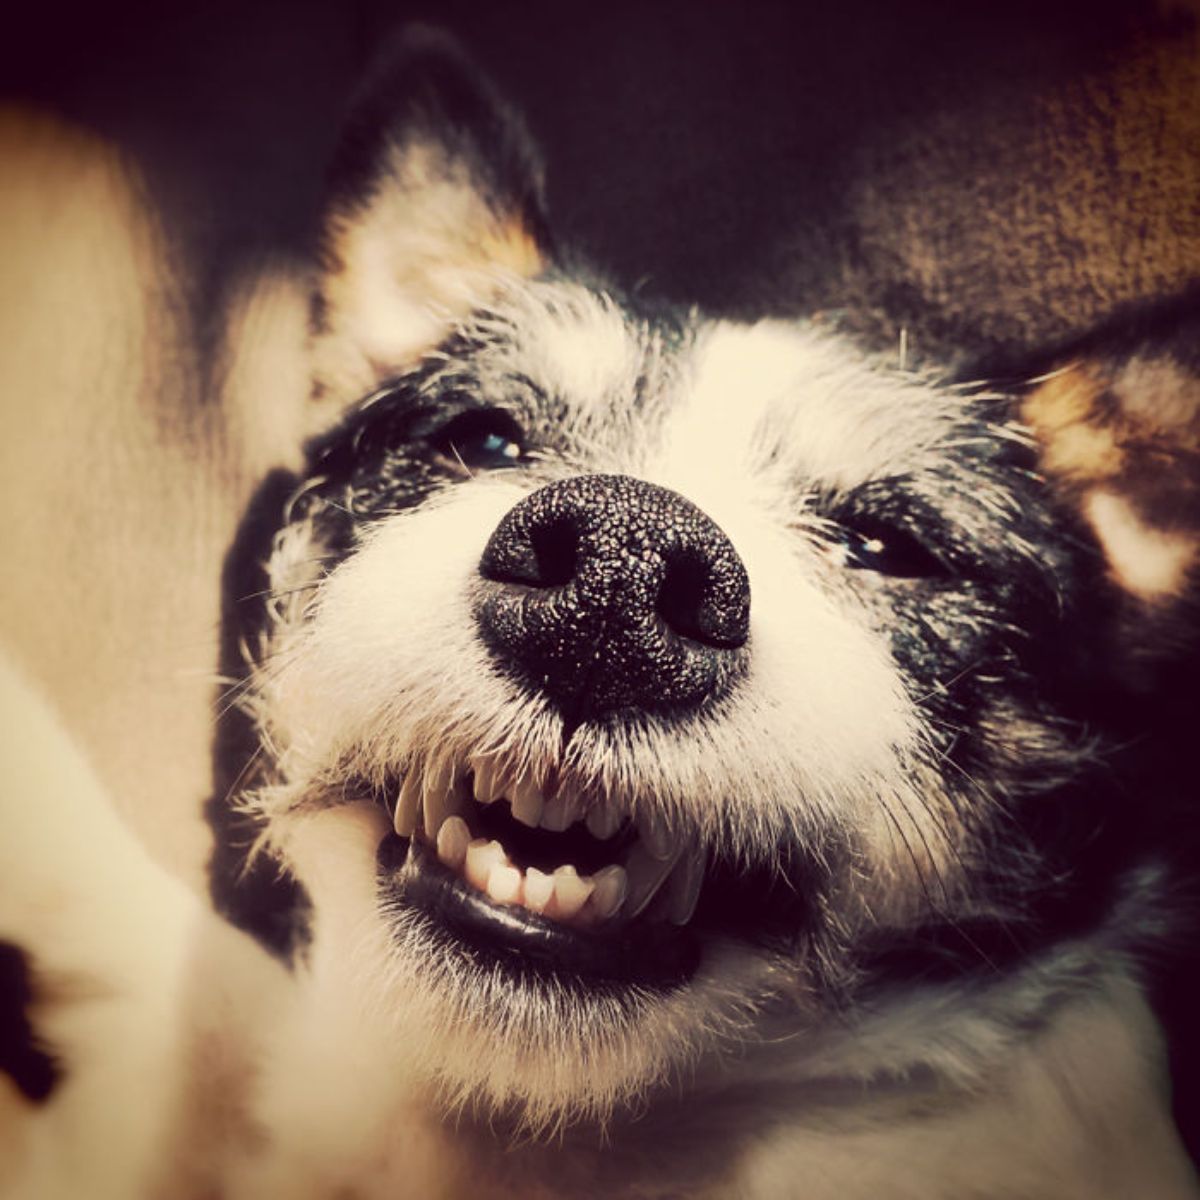 close up of smiling black and white dog's face